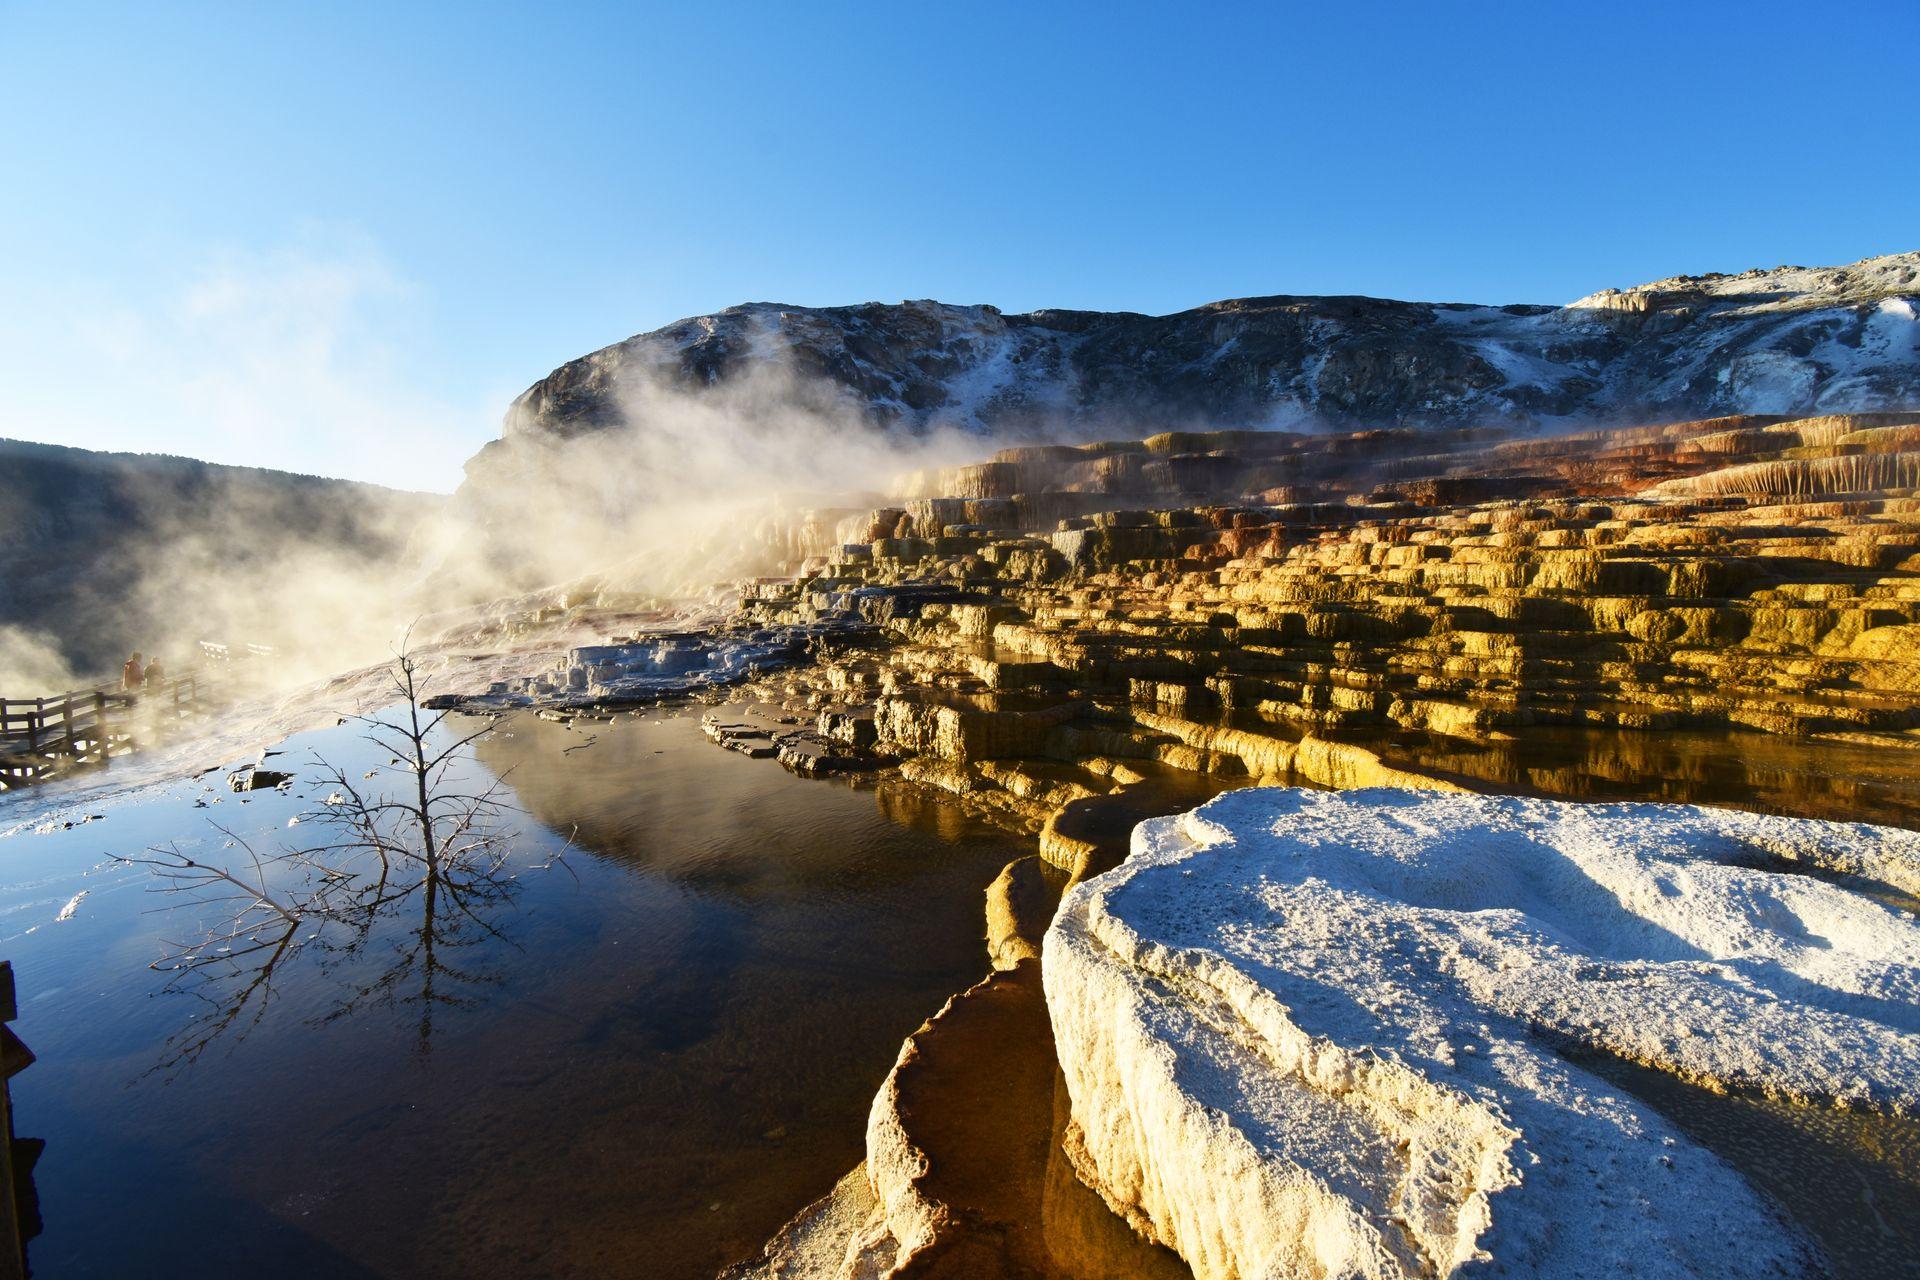 Steam rising up from the Mammoth Hot Springs area at sunrise.